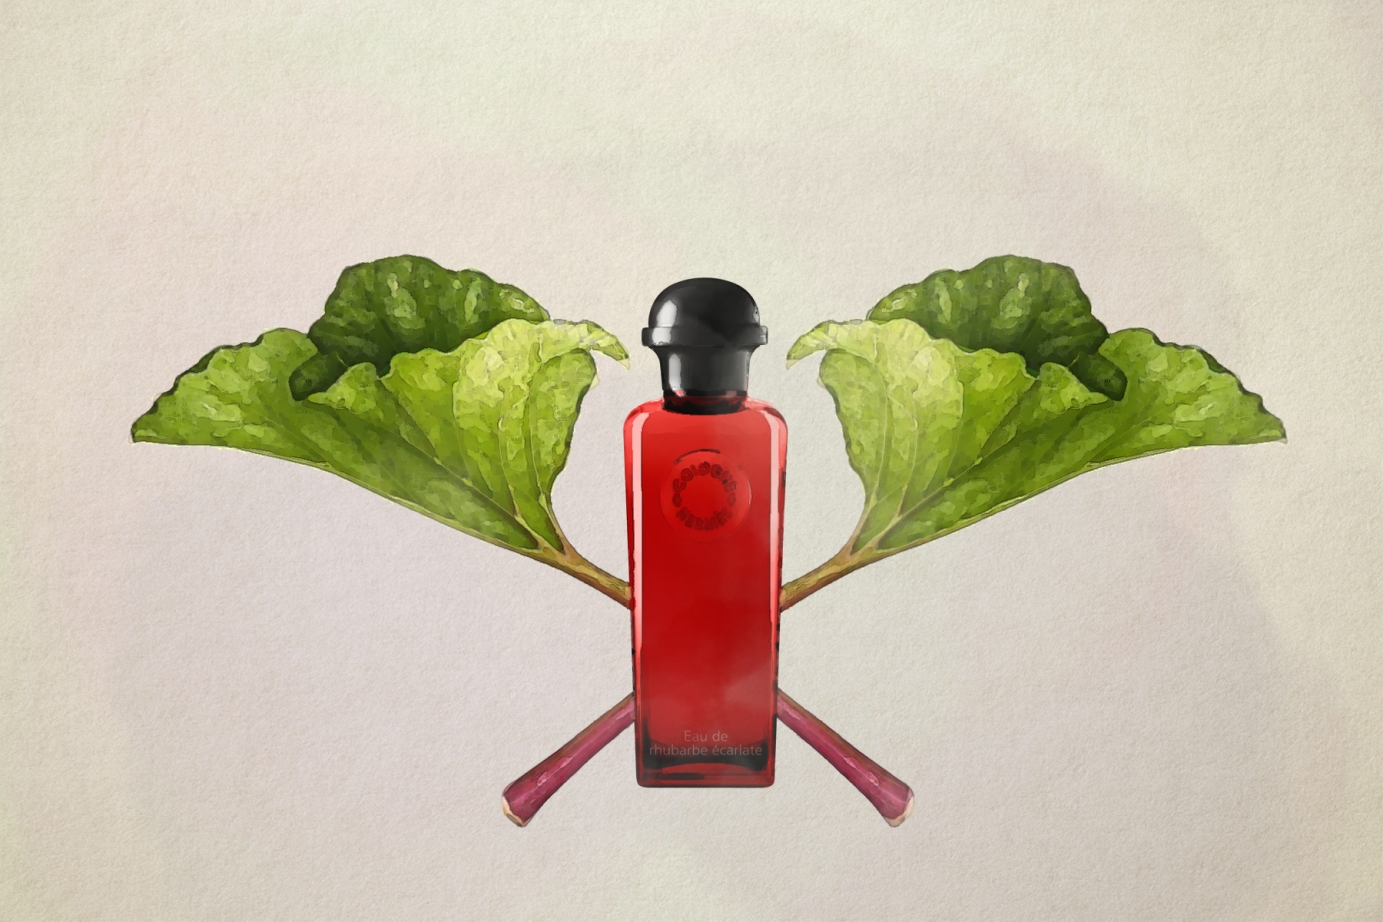 Olfactory illustrations for a magazine